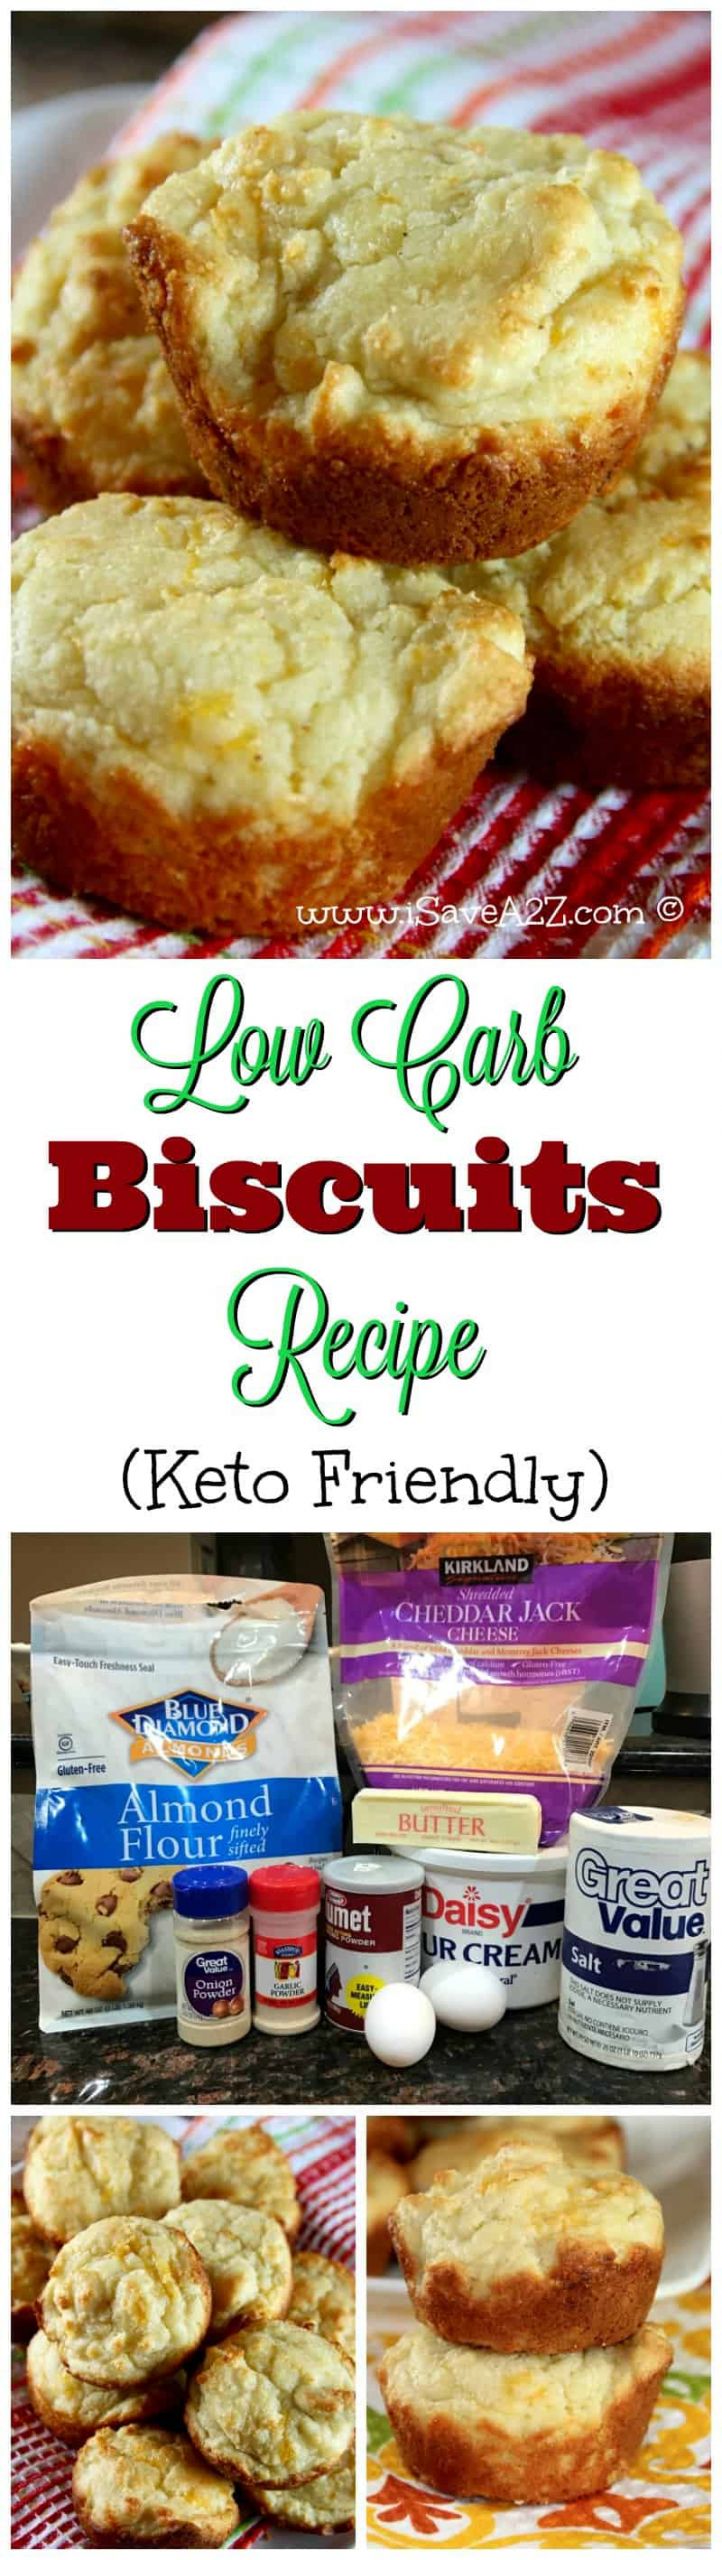 Low Carb Keto Biscuits Recipe
 Low Carb Biscuits Recipe Keto Friendly iSaveA2Z